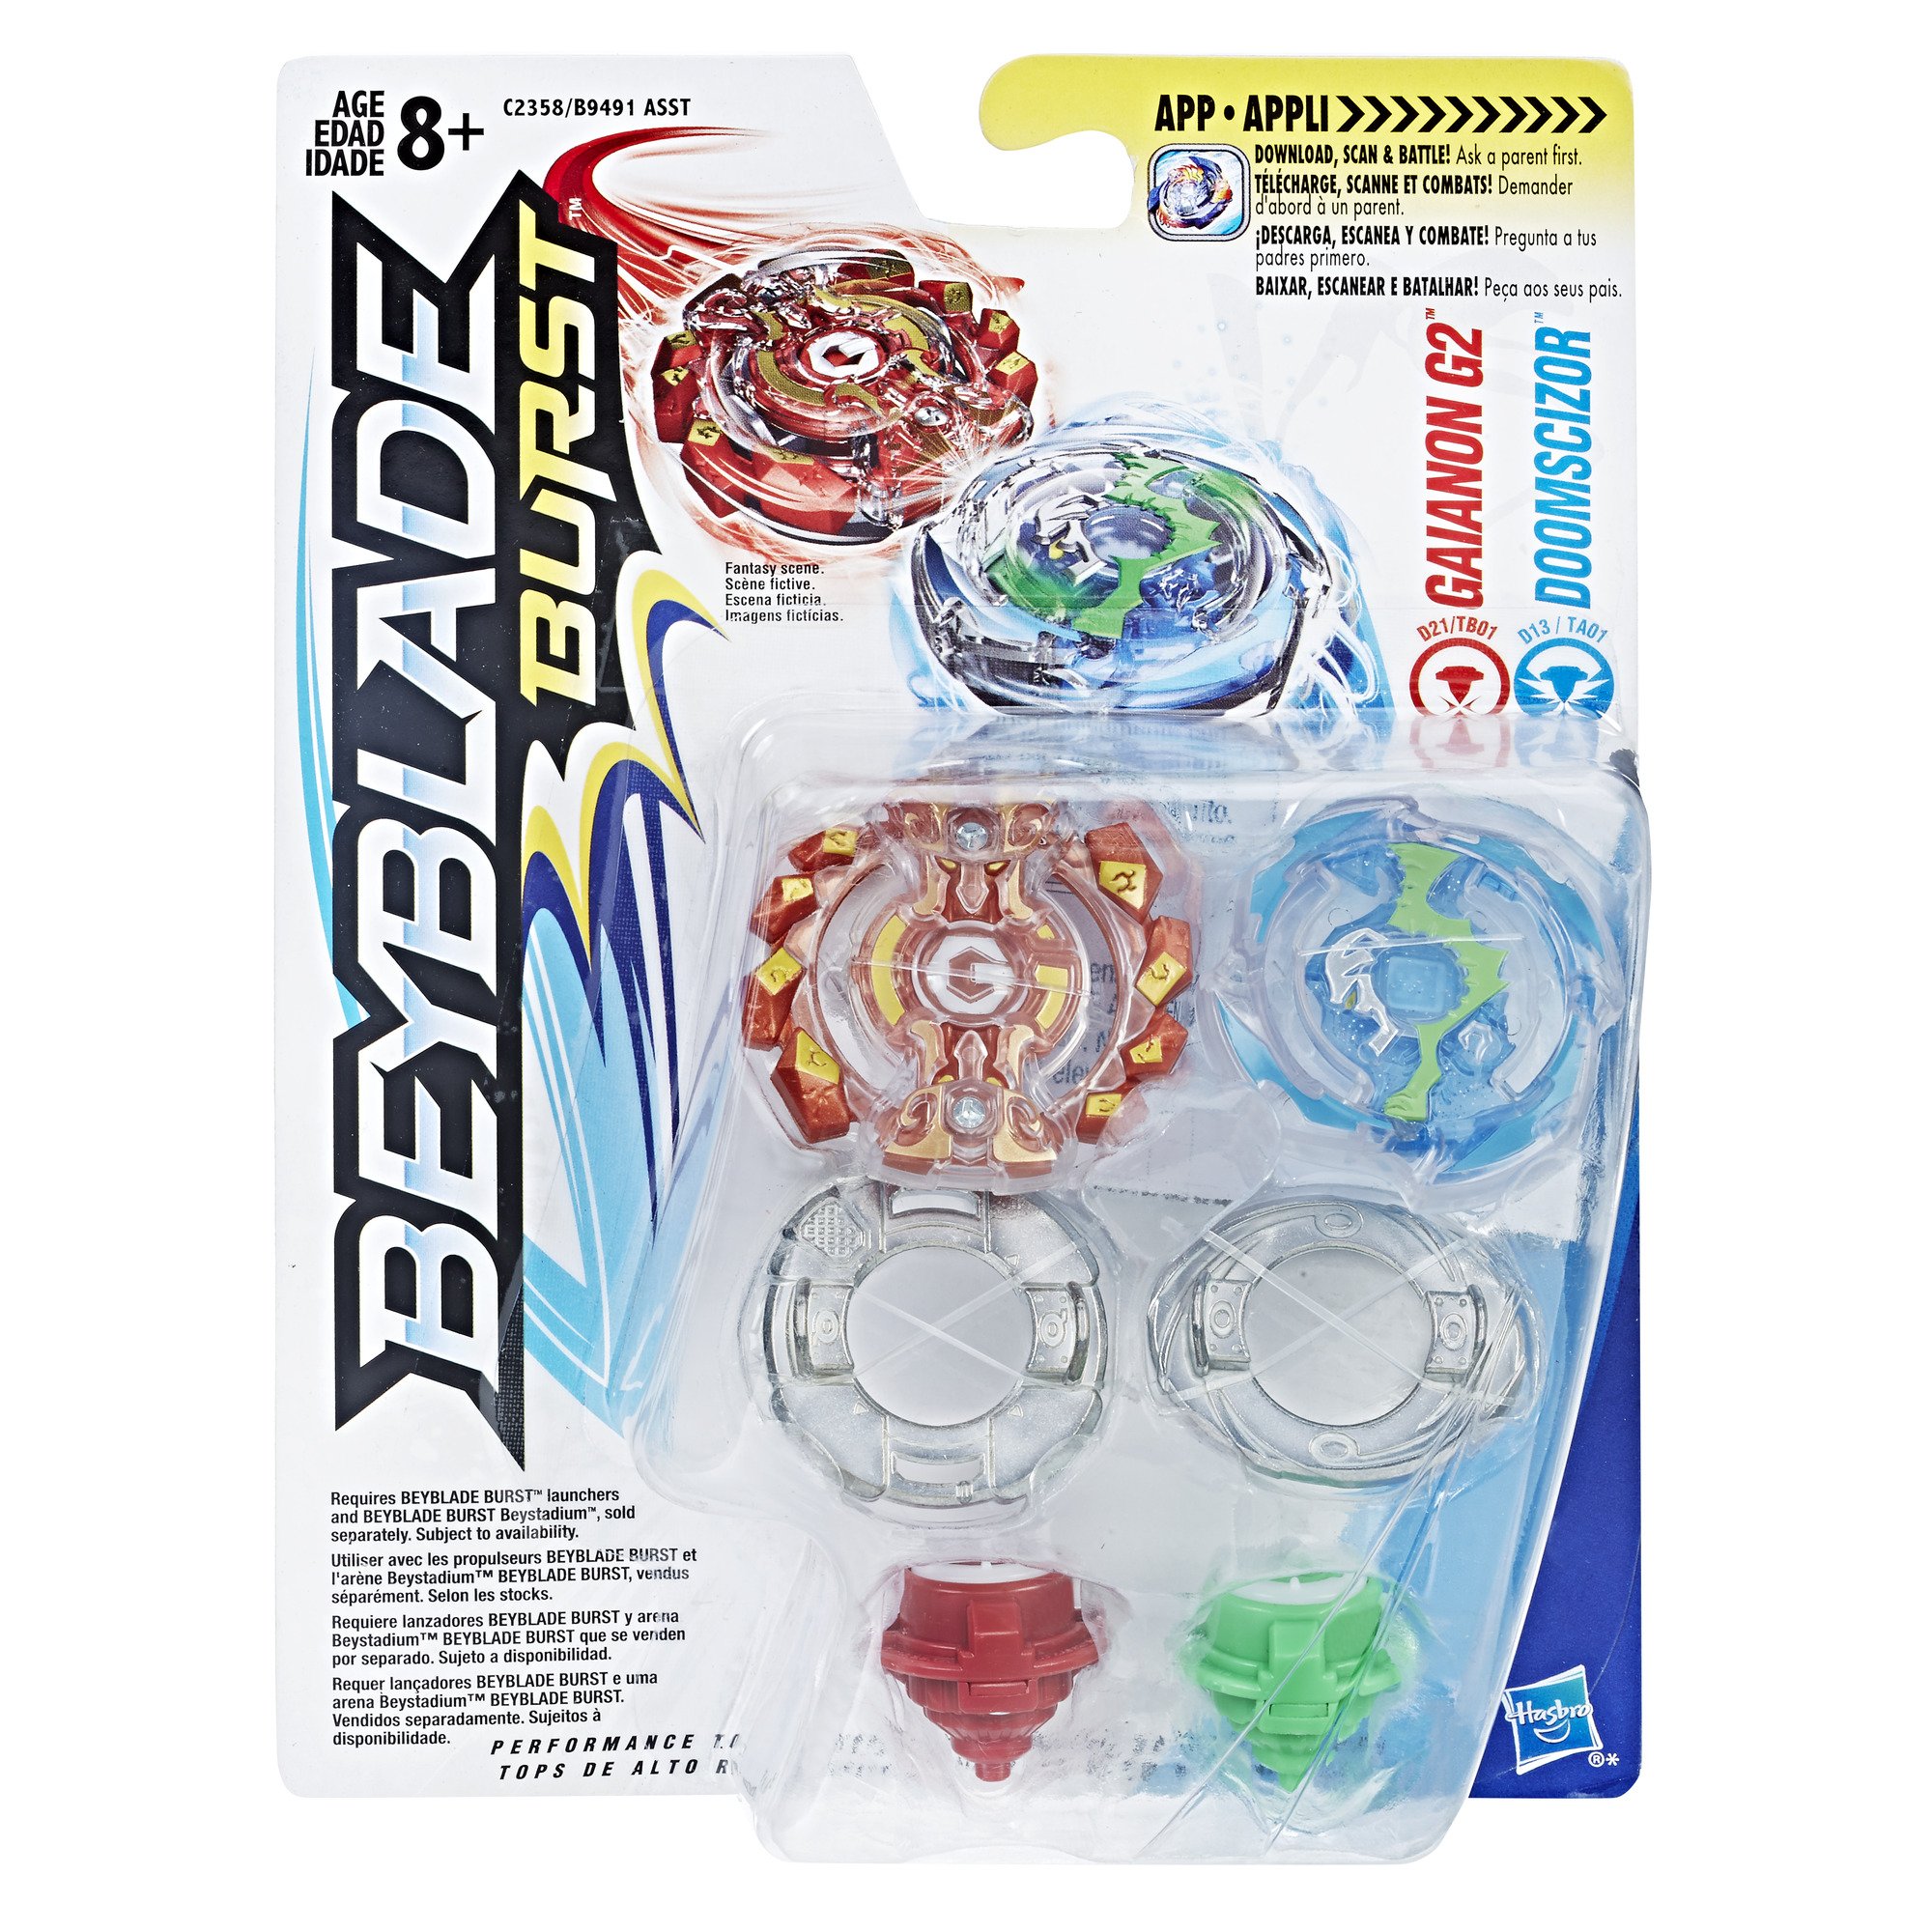 Beyblade D1 & G2 Action Figure